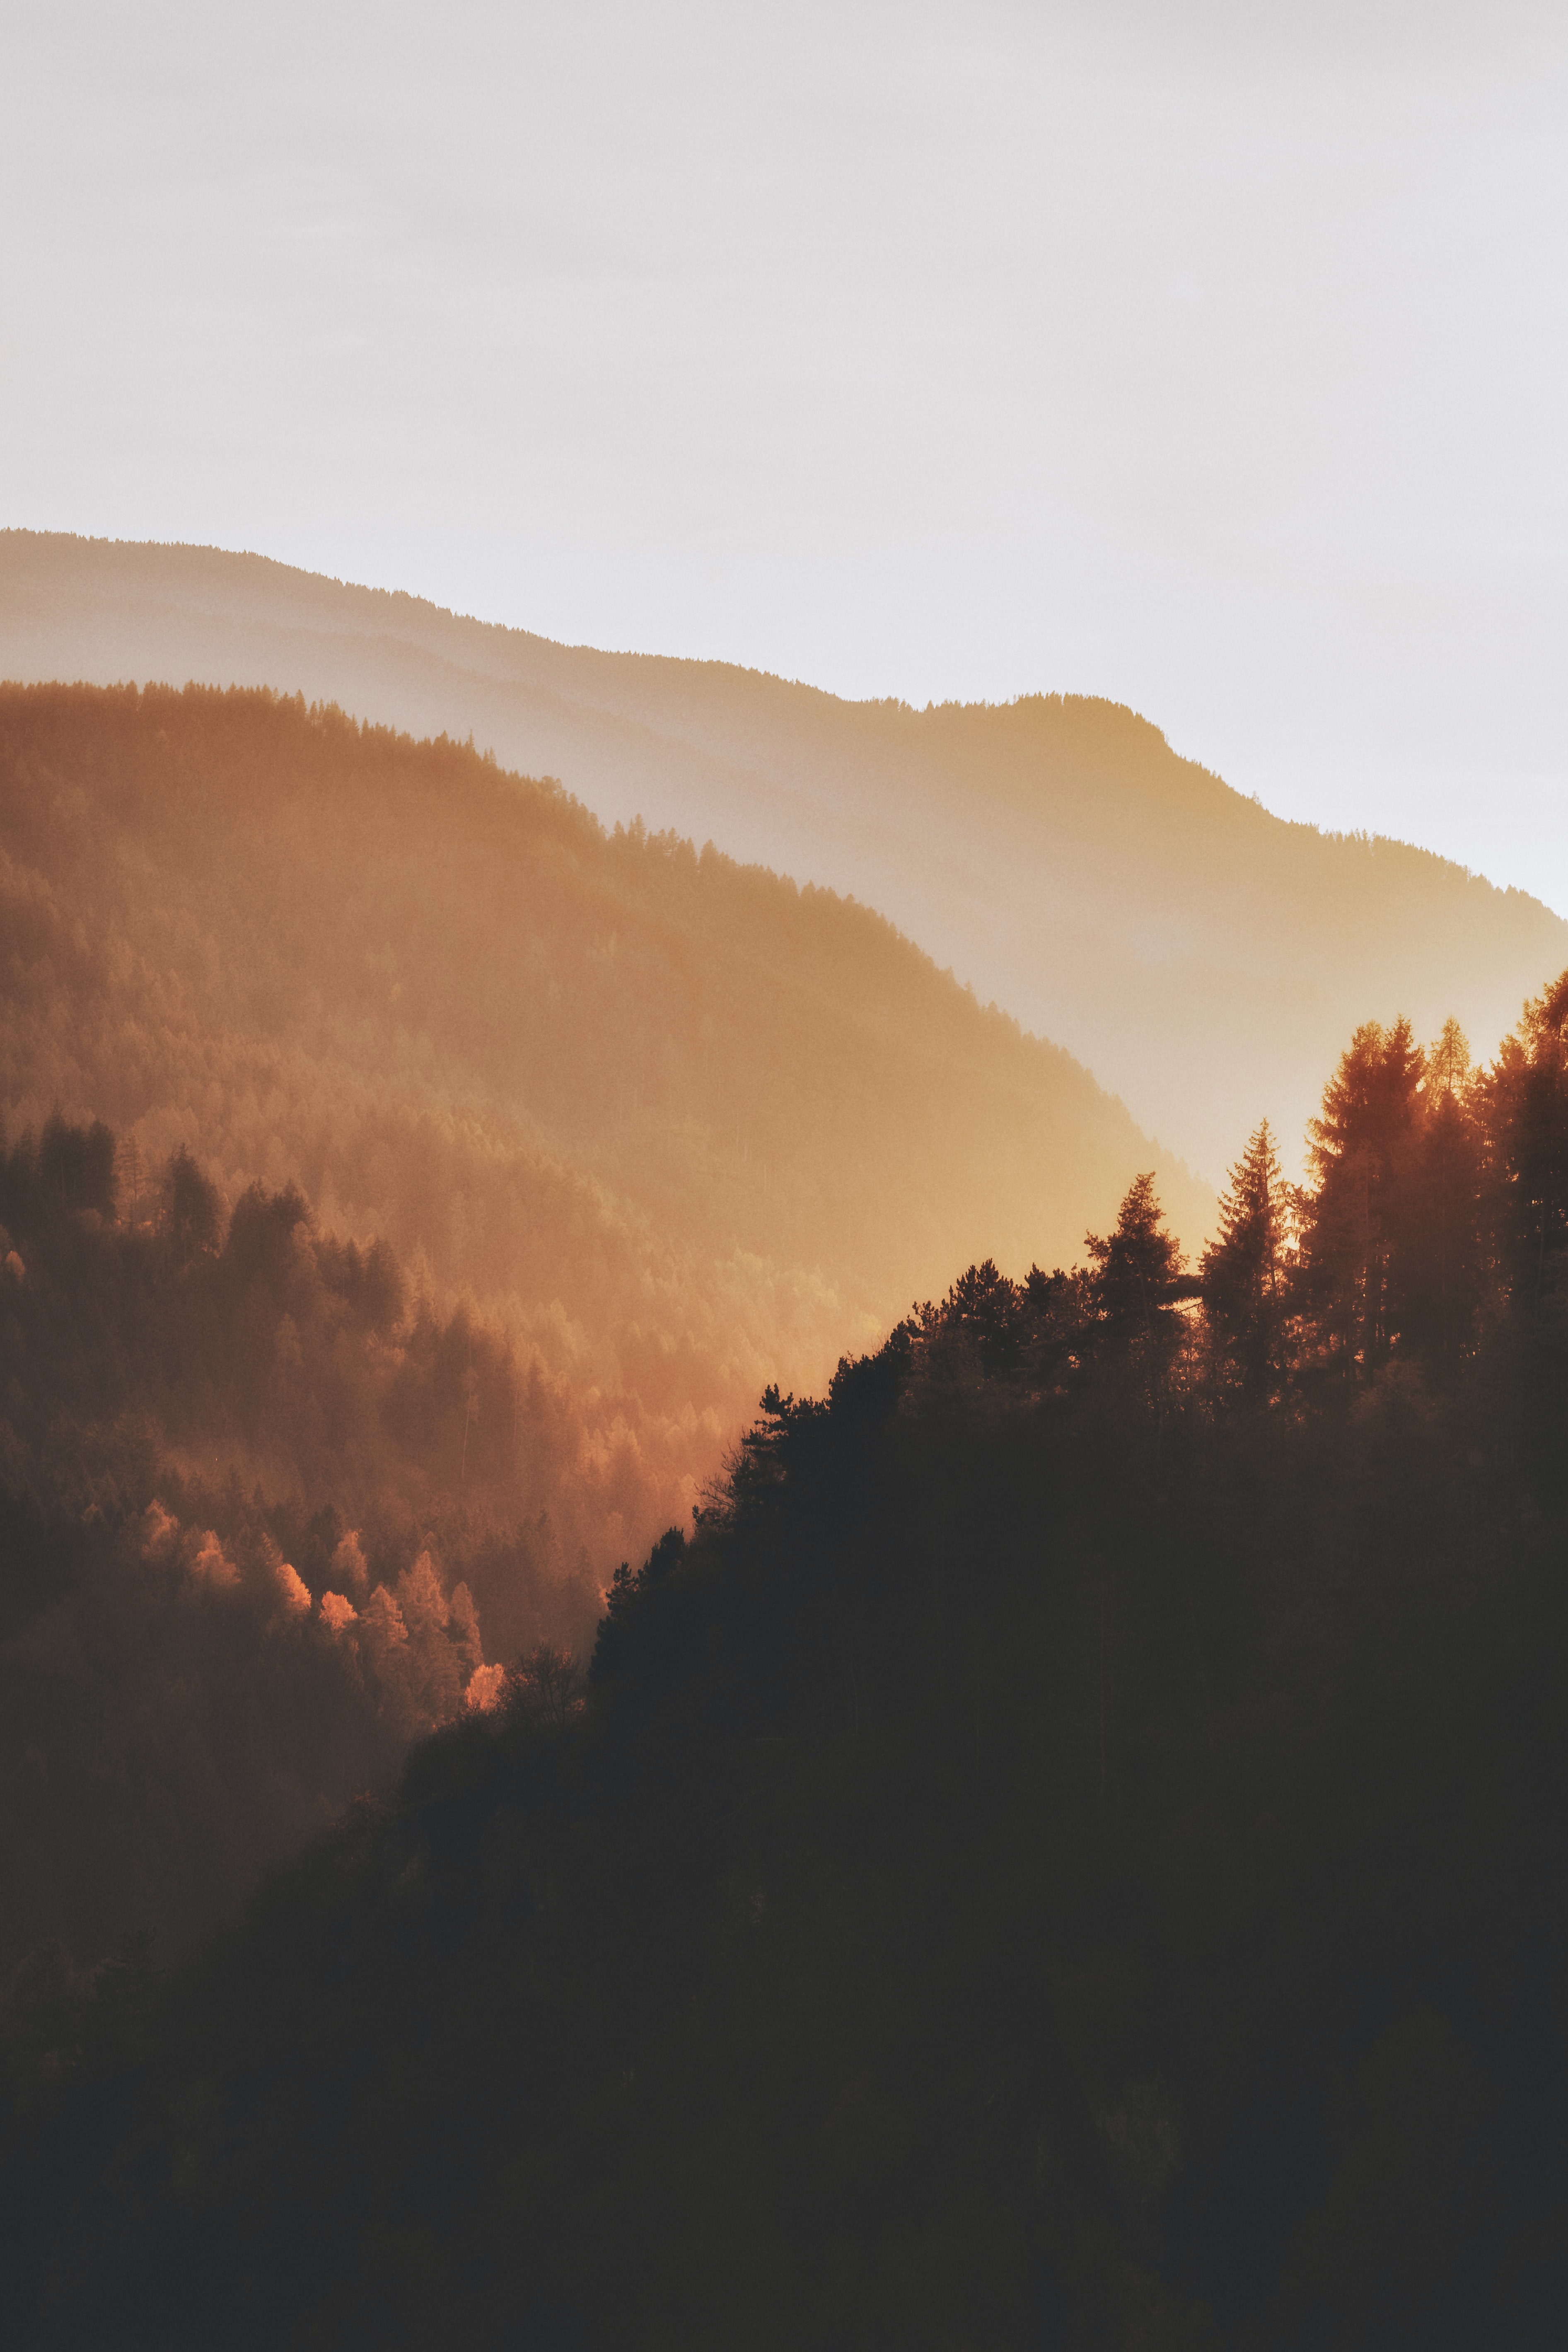 sunset, hills, nature, trees, forest